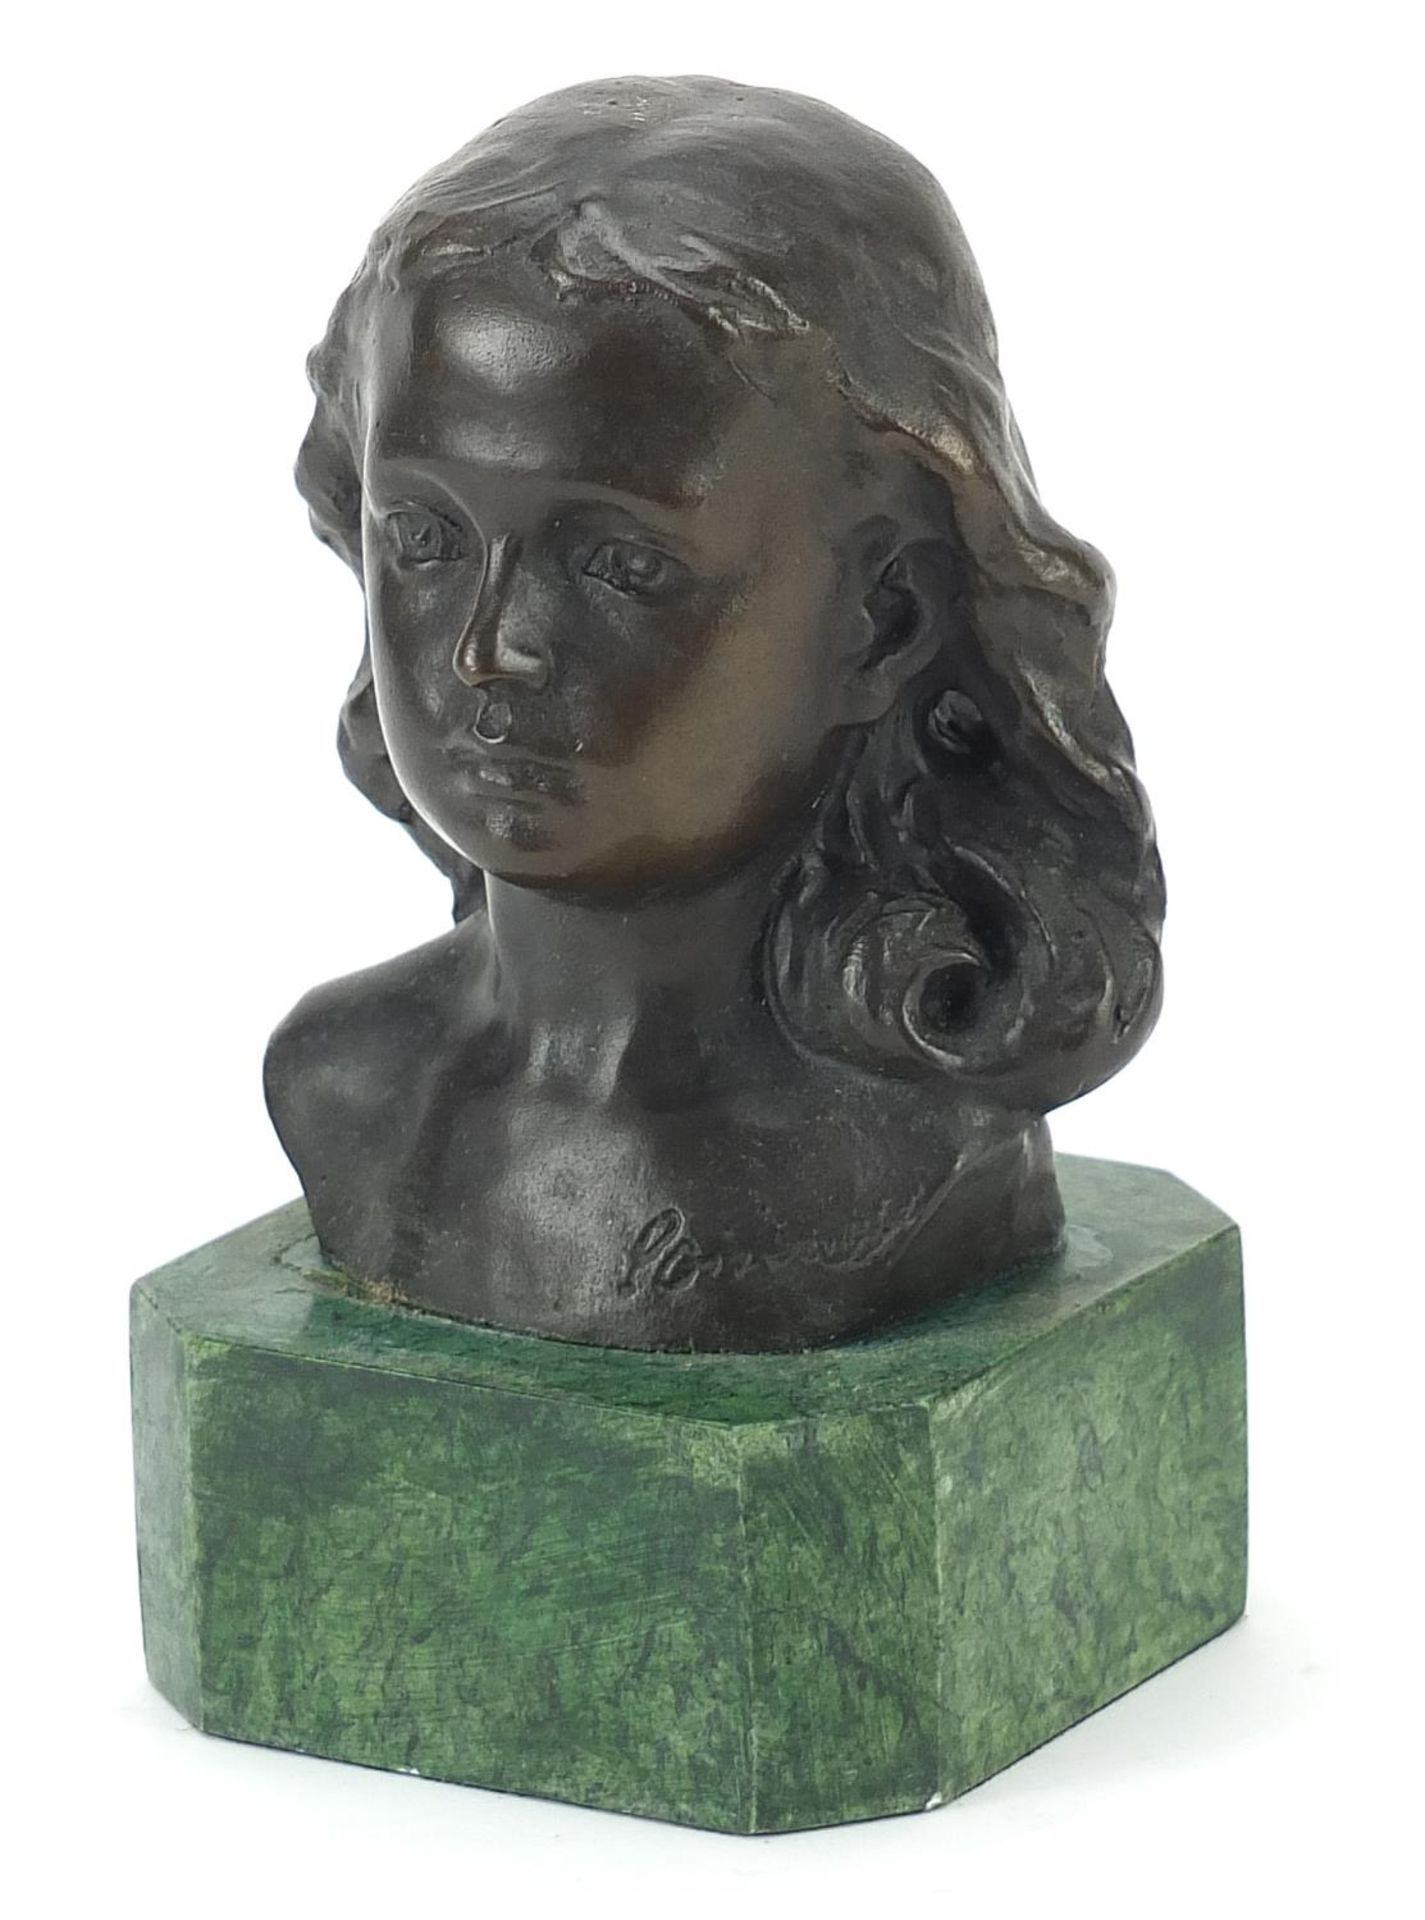 Patinated bronze head and shoulders bust of a young female raised on a green marbleised base, 15cm